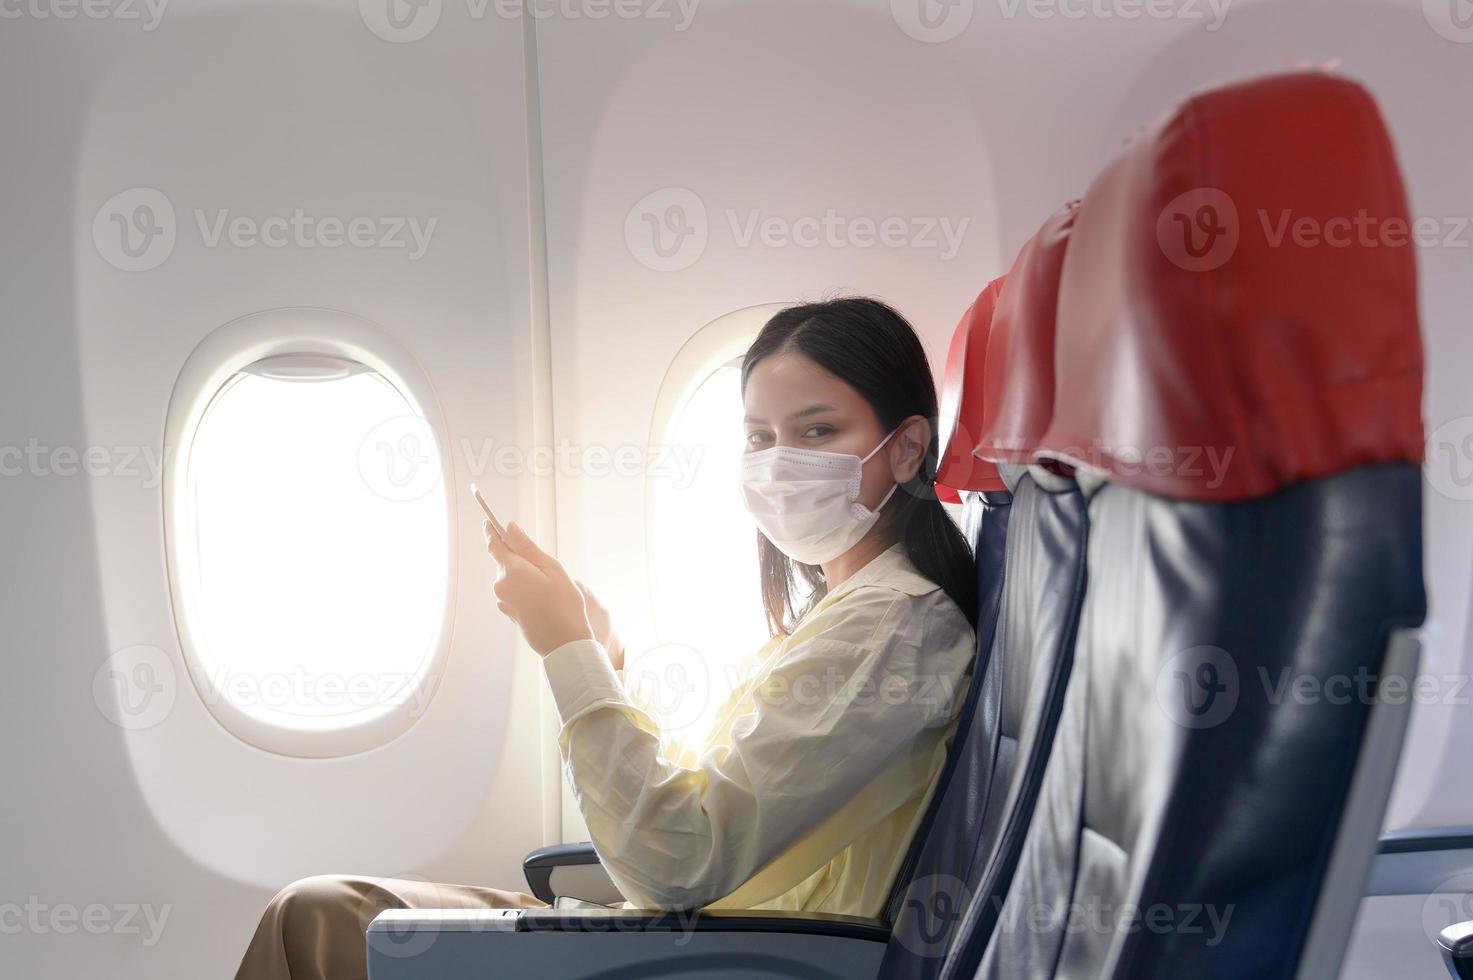 A young woman wearing face mask is traveling on airplane , New normal travel after covid-19 pandemic concept photo